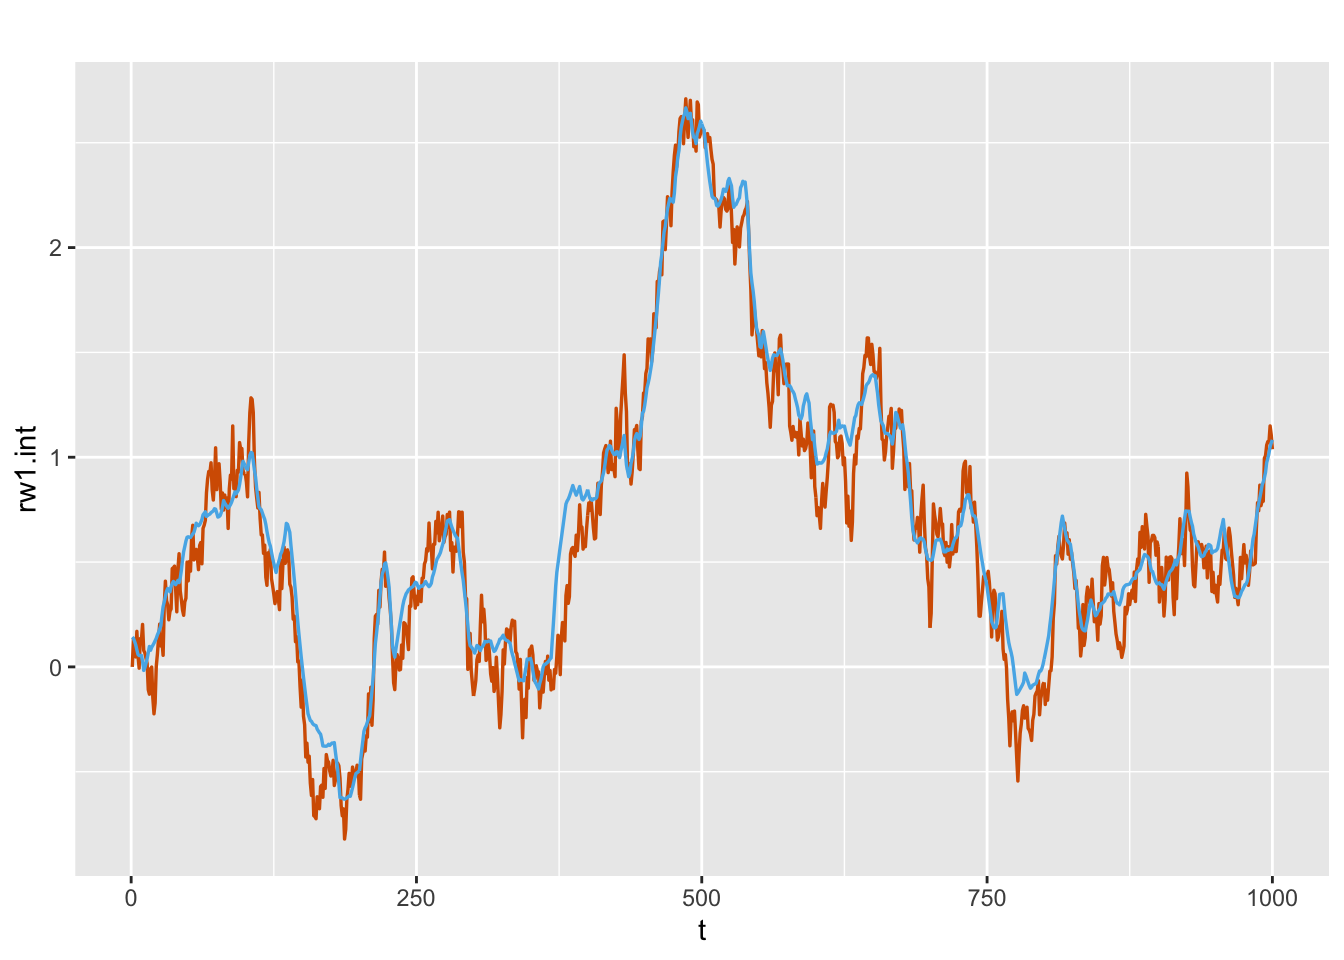 Actual values (red) and estimated (blue) random walk series for the dynamic intercept $\beta_{1,t,0}$ from Model D1.